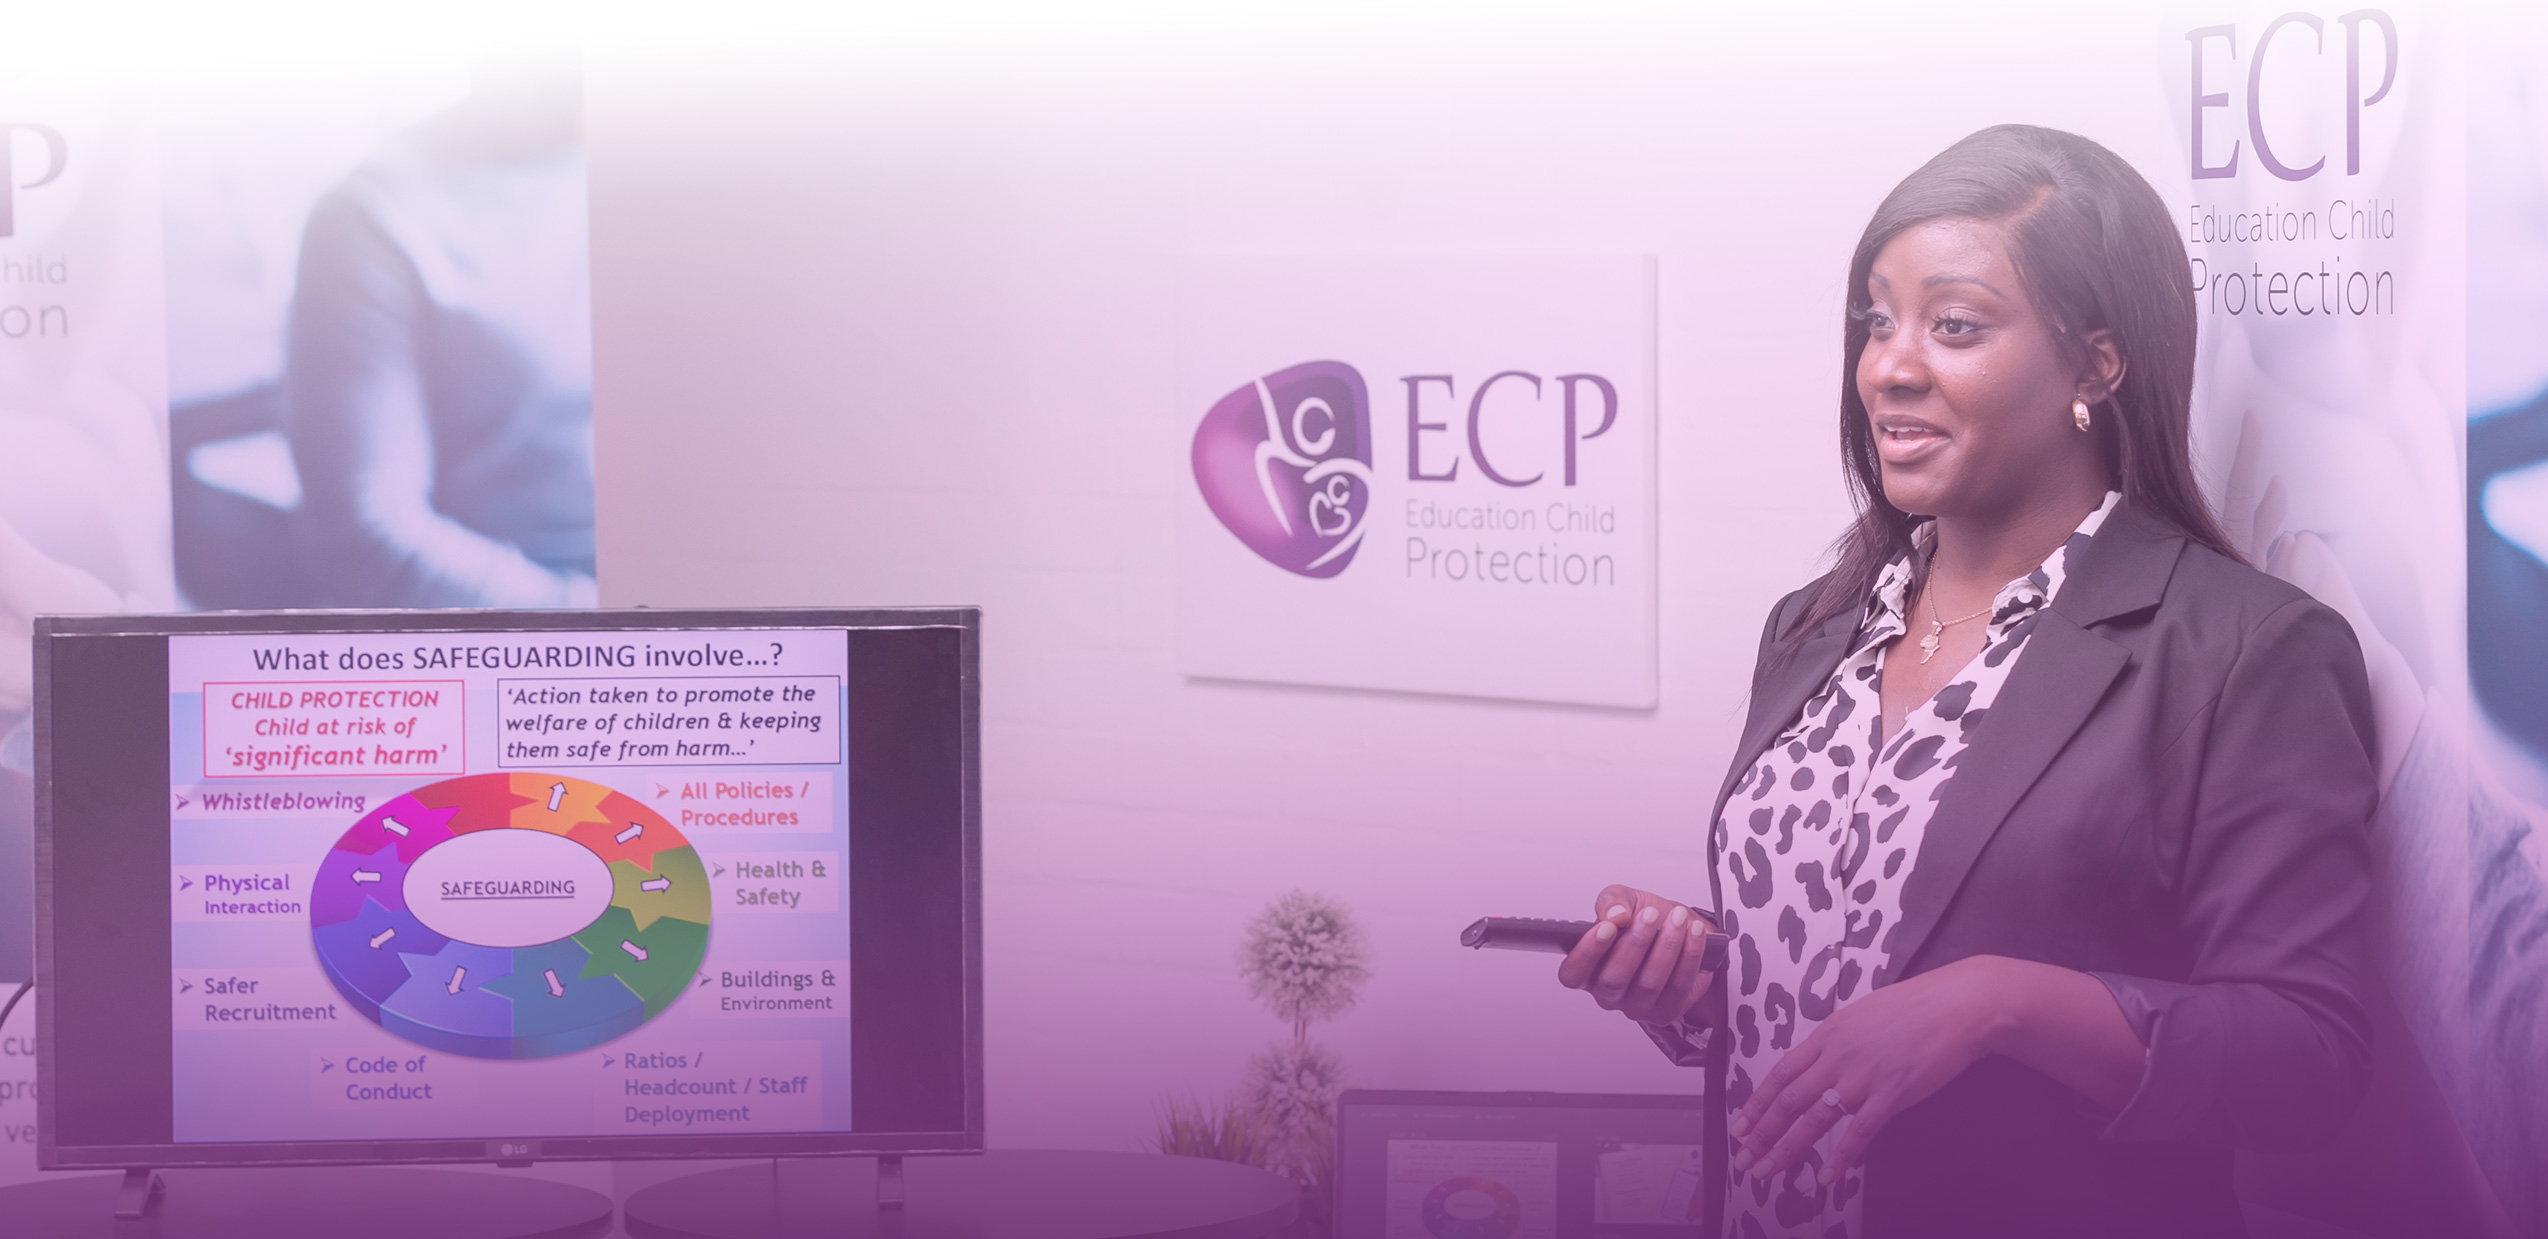 ecp training courses for professionals - child protection